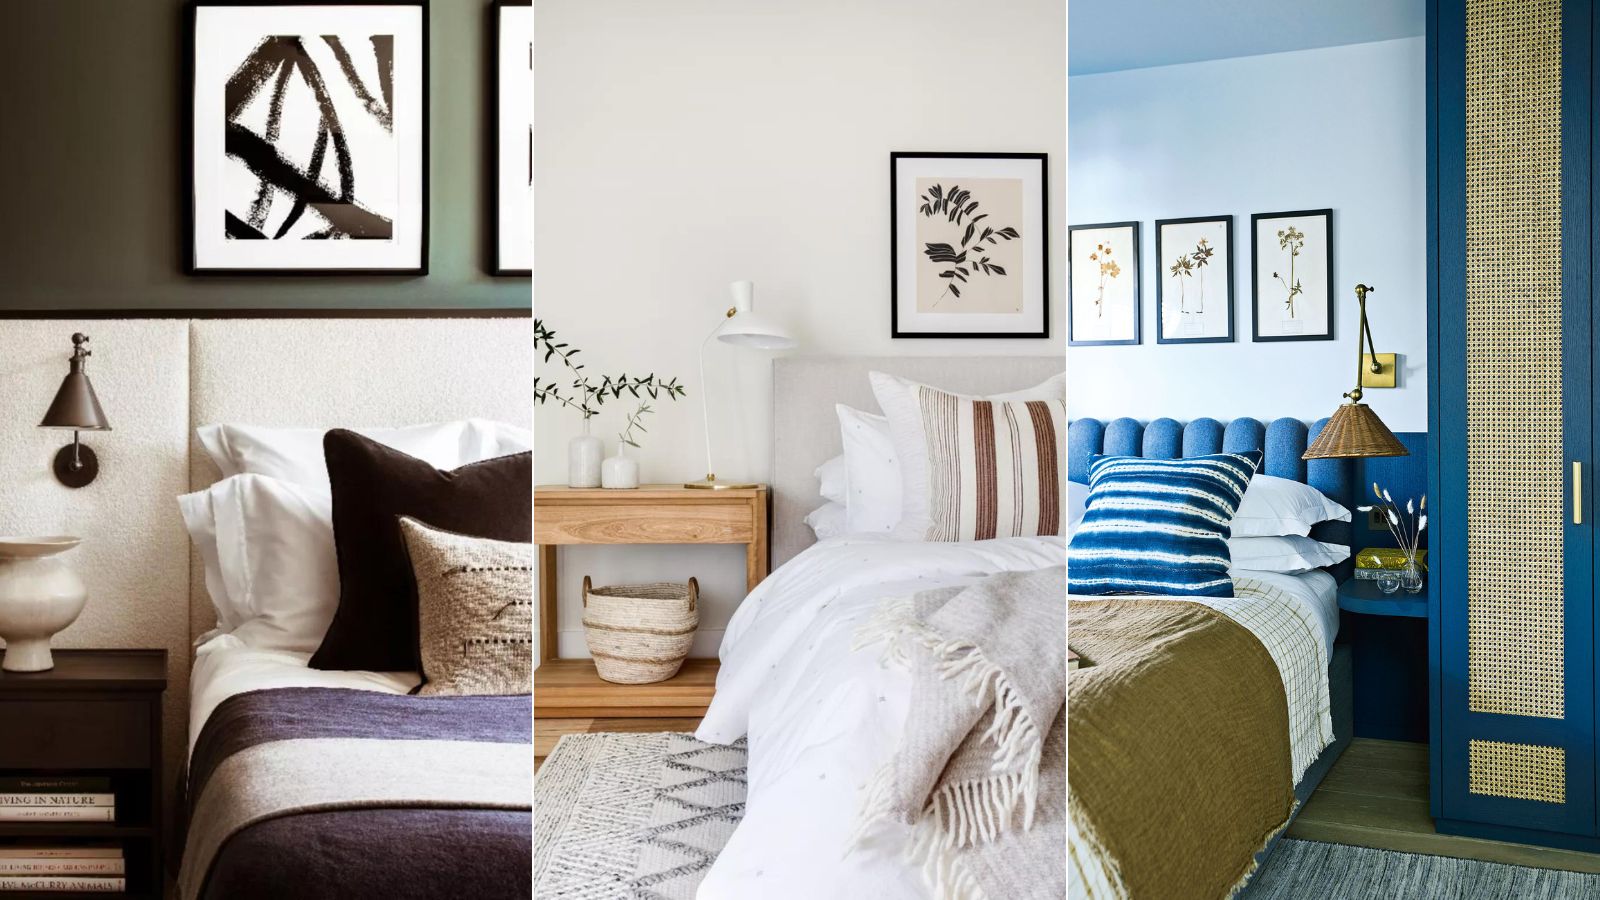 5 best colors to paint a small bedroom, according to experts